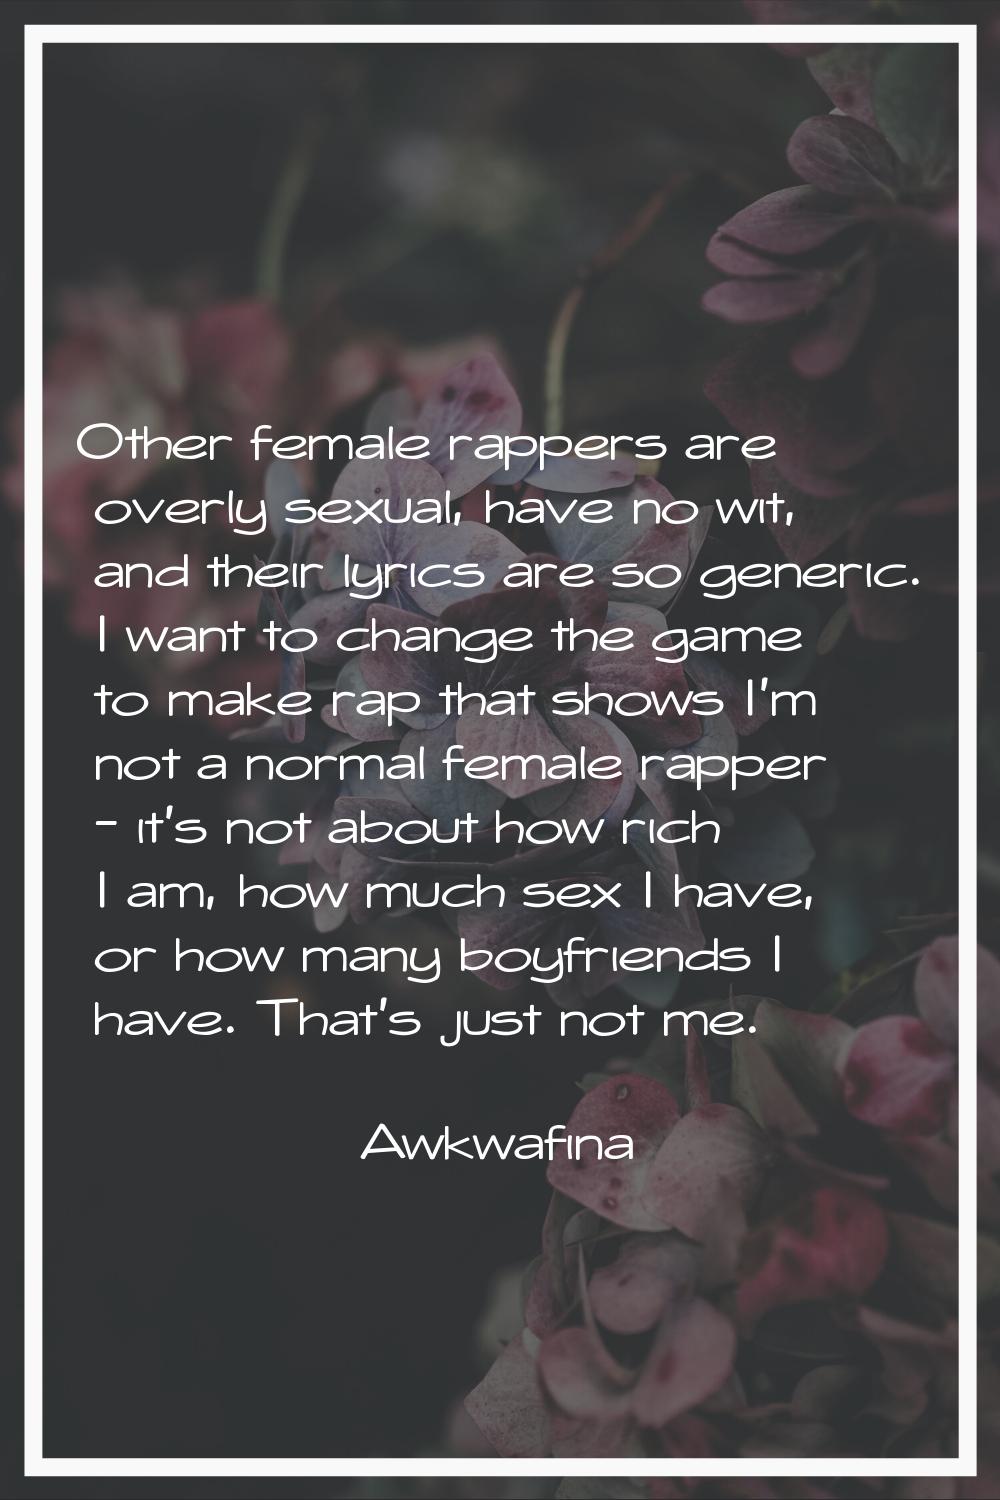 Other female rappers are overly sexual, have no wit, and their lyrics are so generic. I want to cha